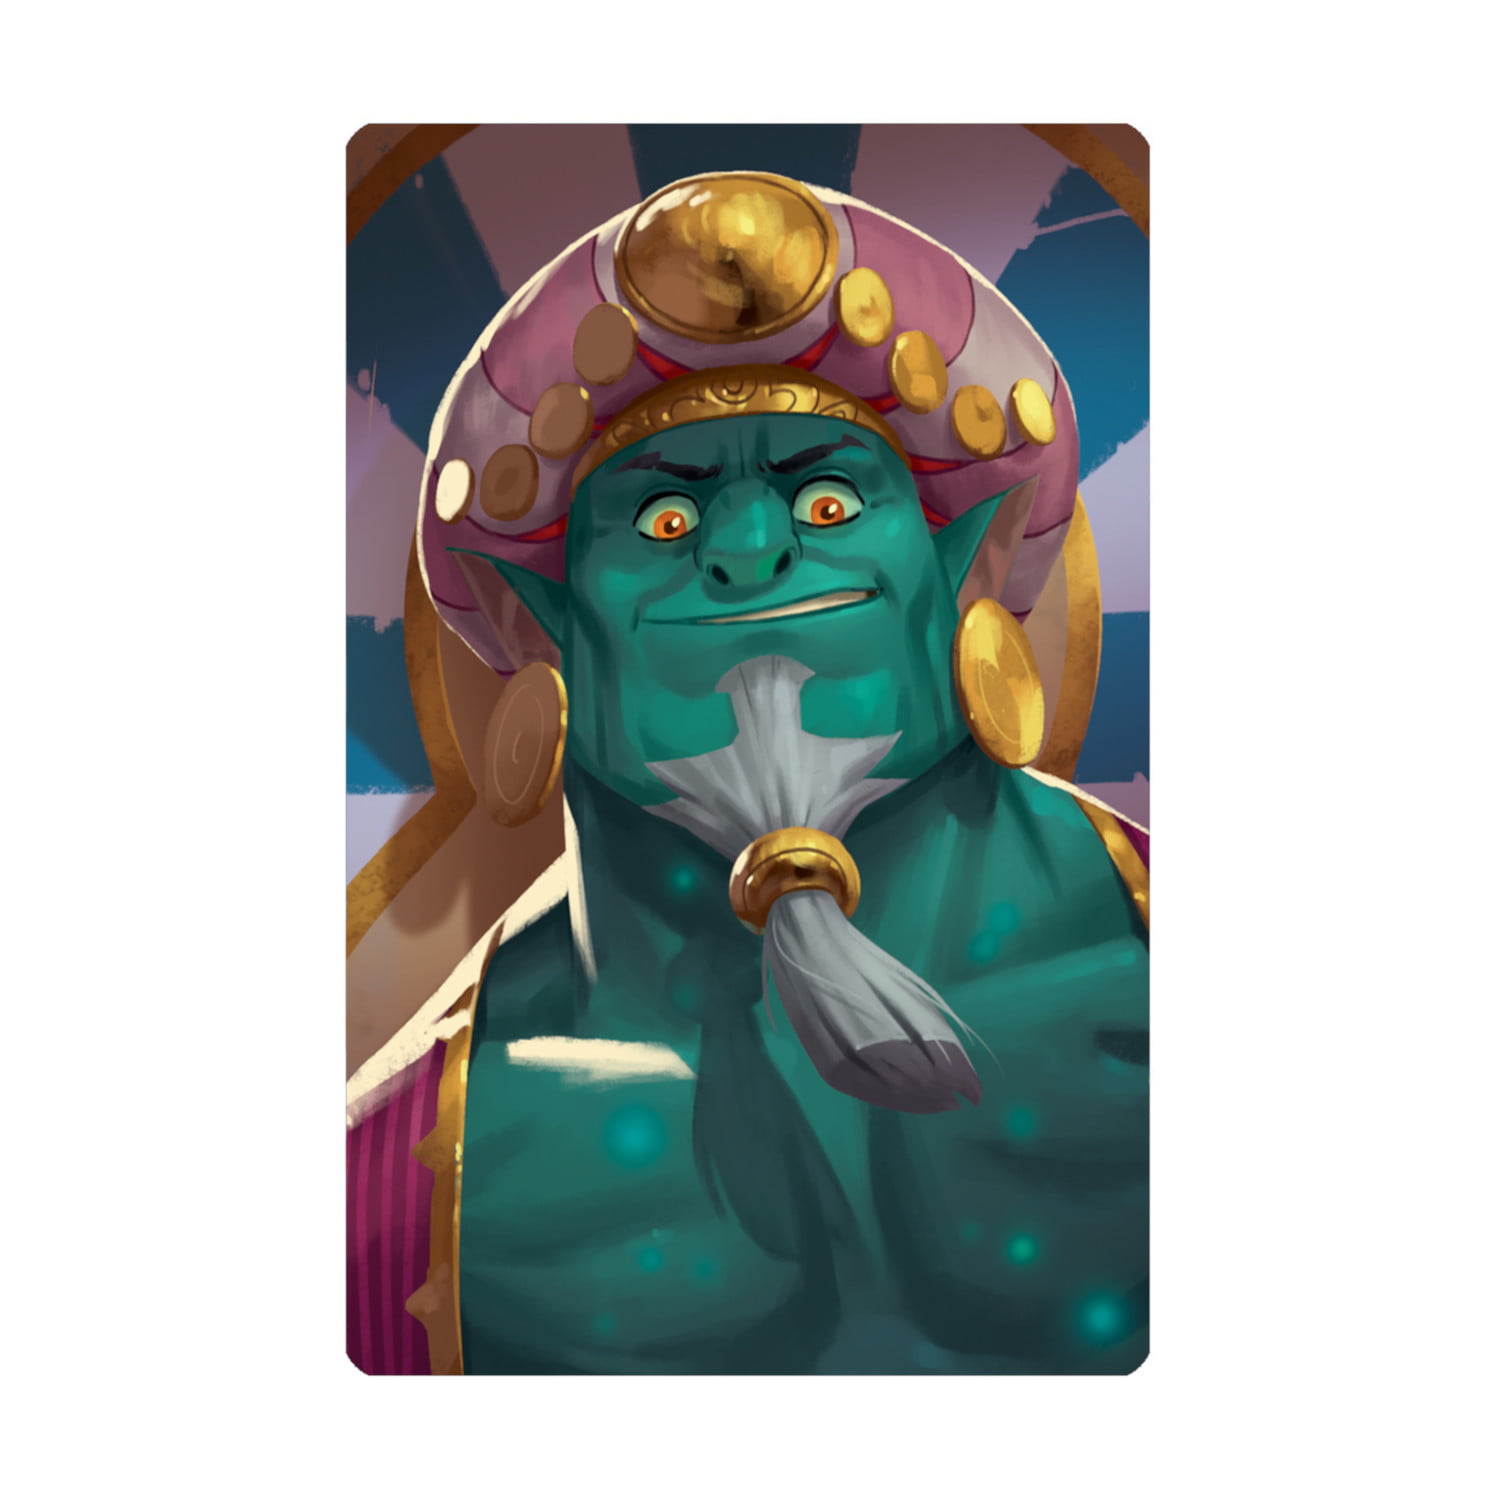 Similo Fables Card Game, by Horrible Guild